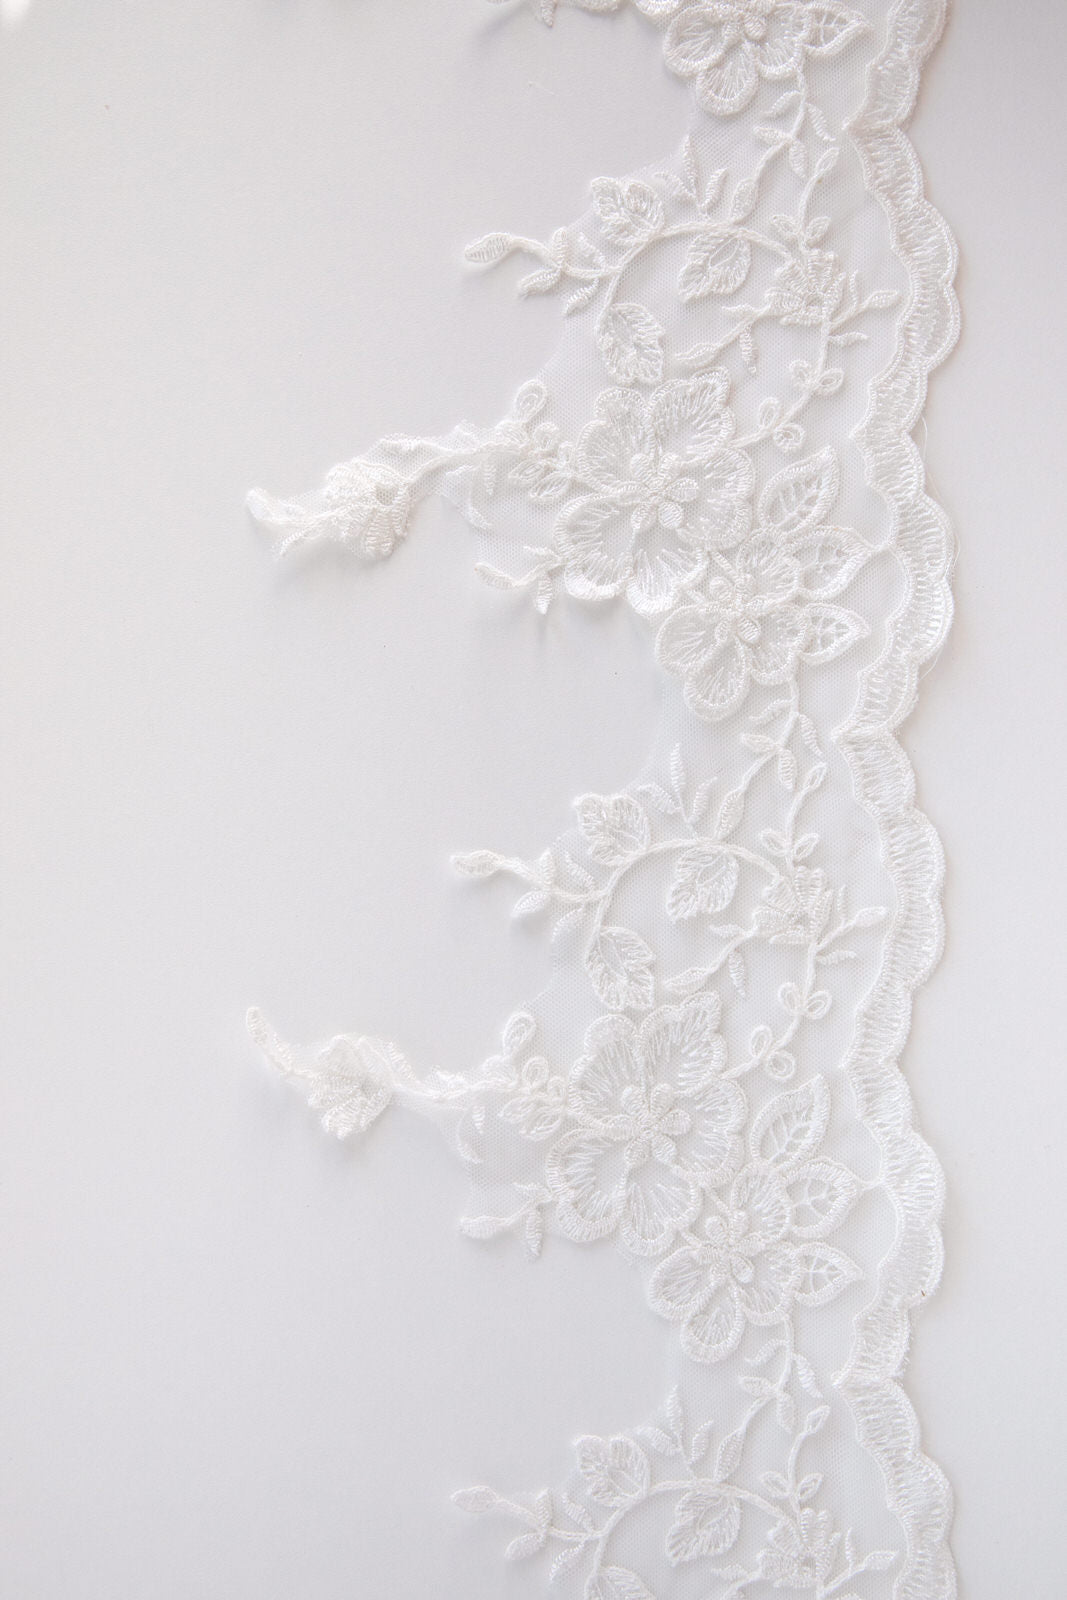 romantic flower lace trim with corded edges for long wedding veil